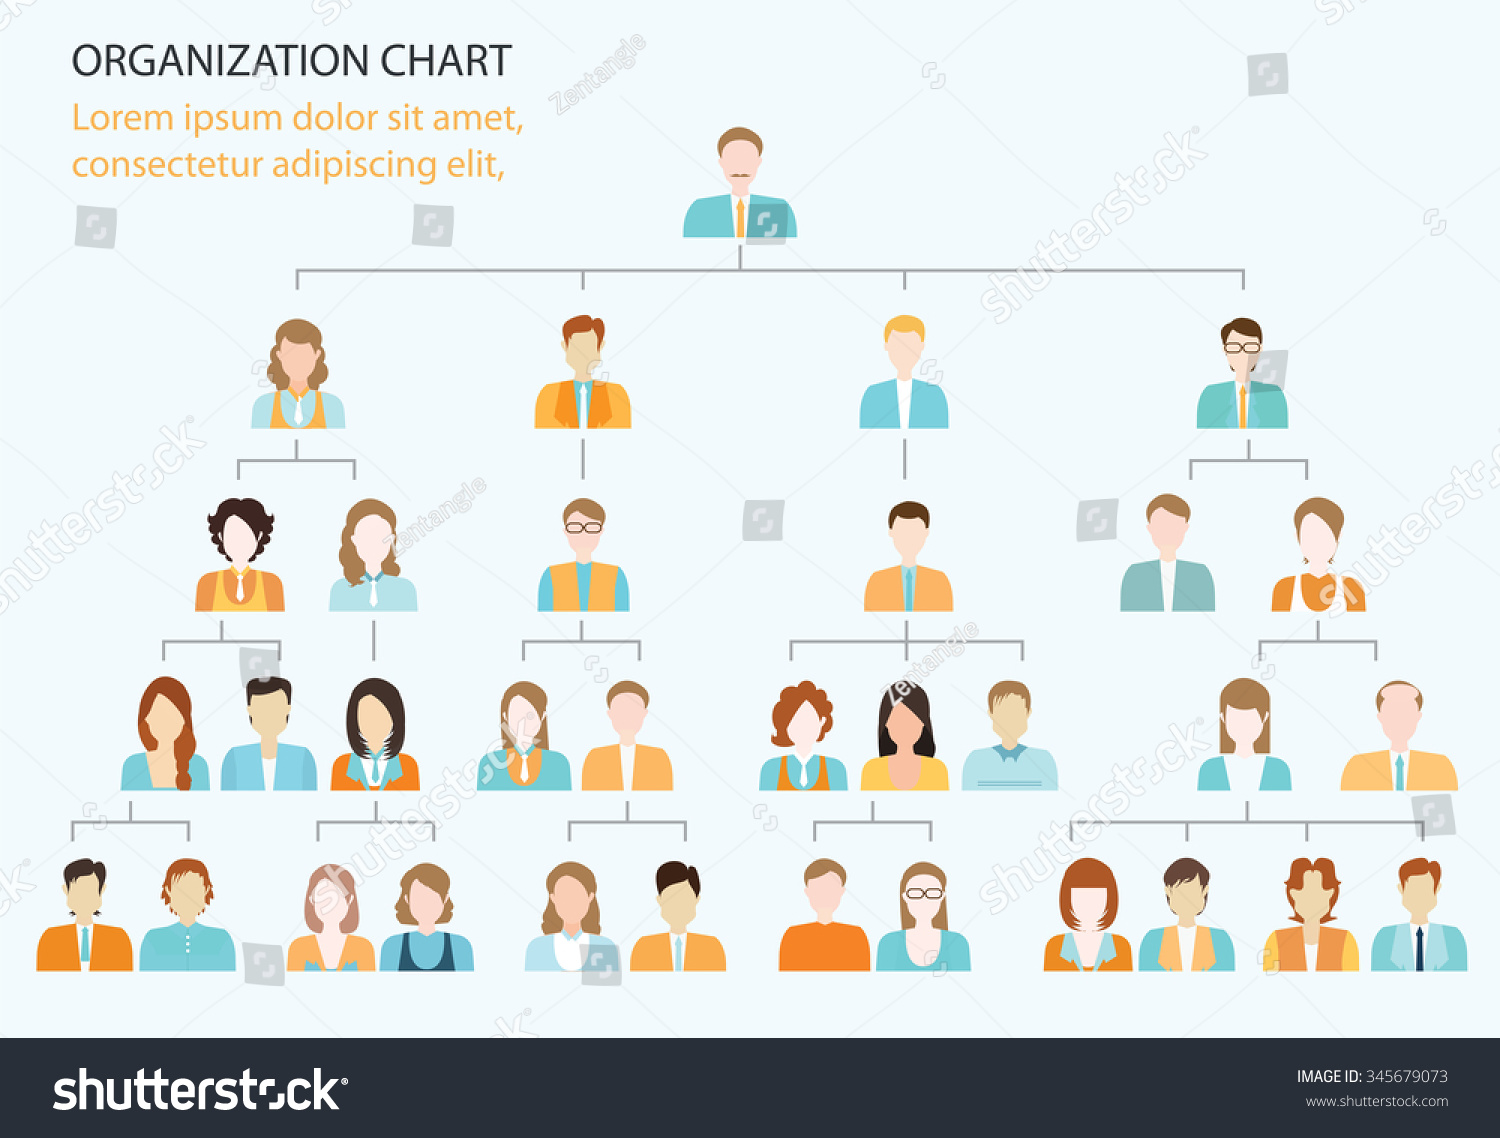 Organizational Chart Corporate Business Hierarchy People Stock Vector ...